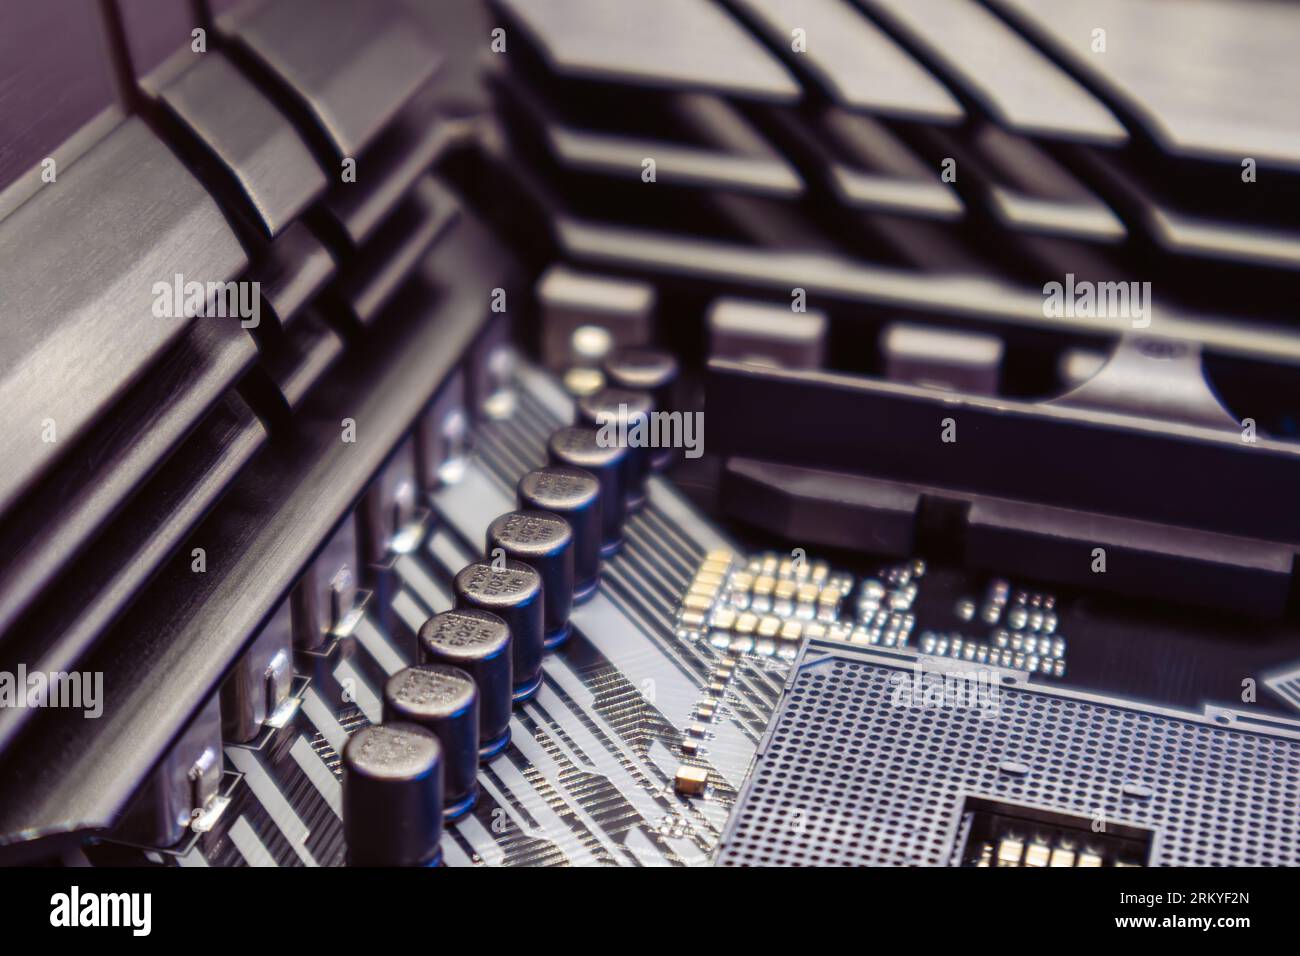 Powerful PC with AM4 CPU Socket on motherboard. Computer hardware chipset components close-up in blue light. Tech industry electronics background Stock Photo